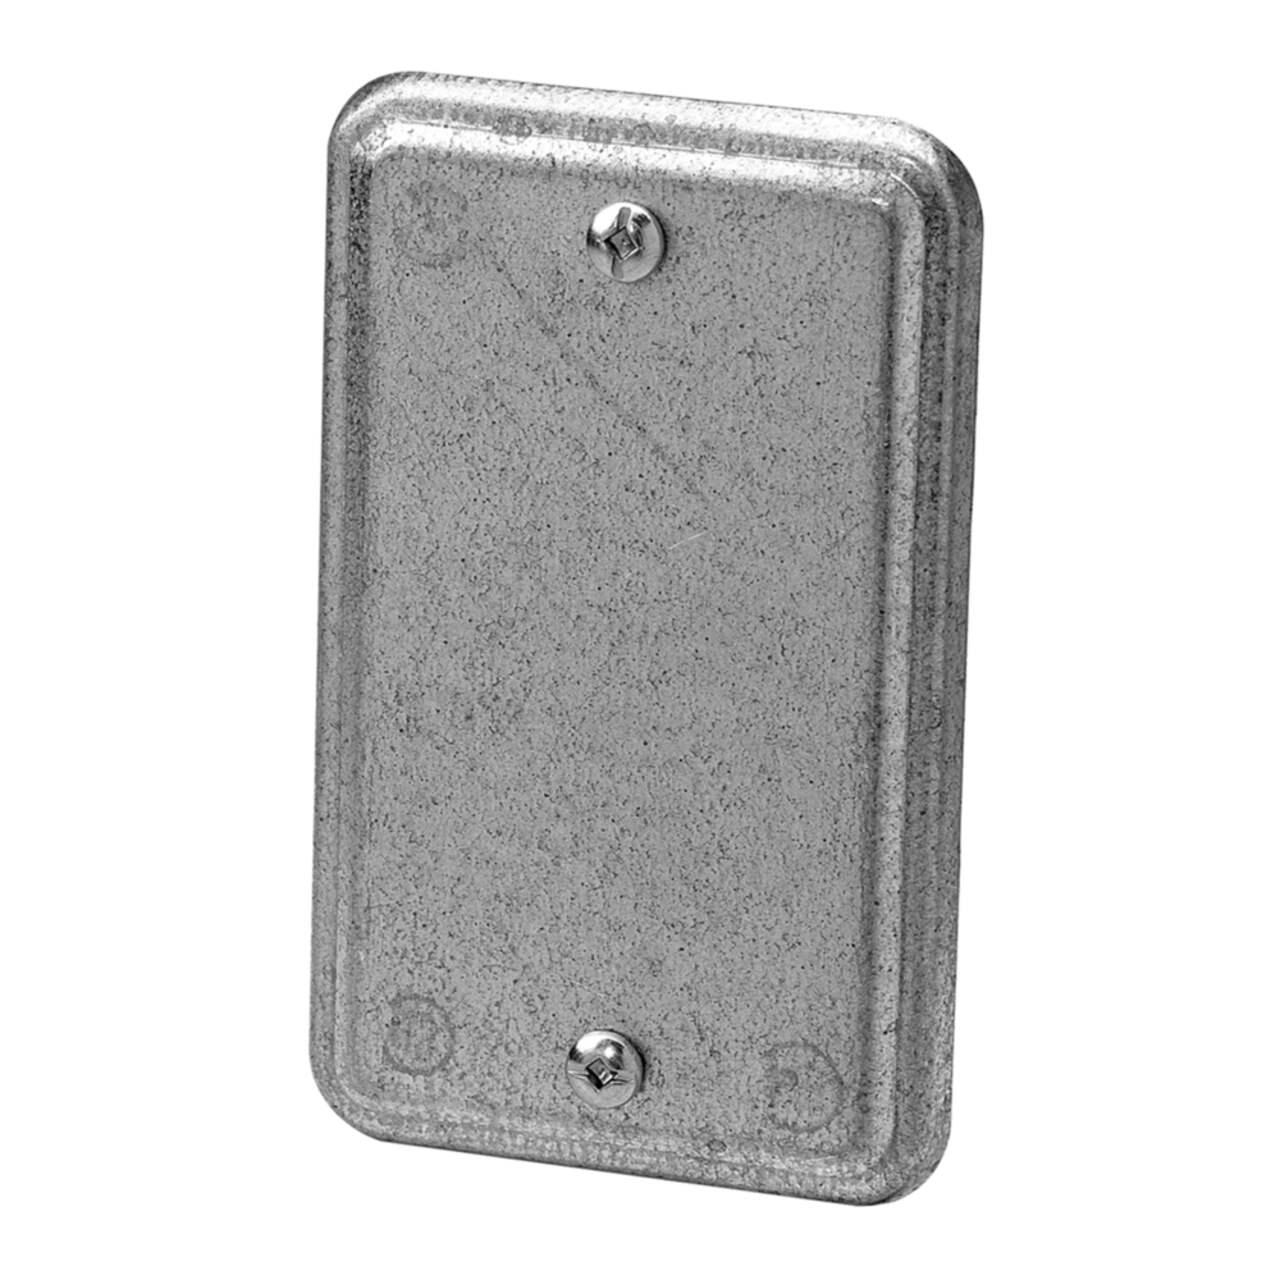 Hubbell 11C4BAR Blank Utility Box Cover, Grey, 4-in